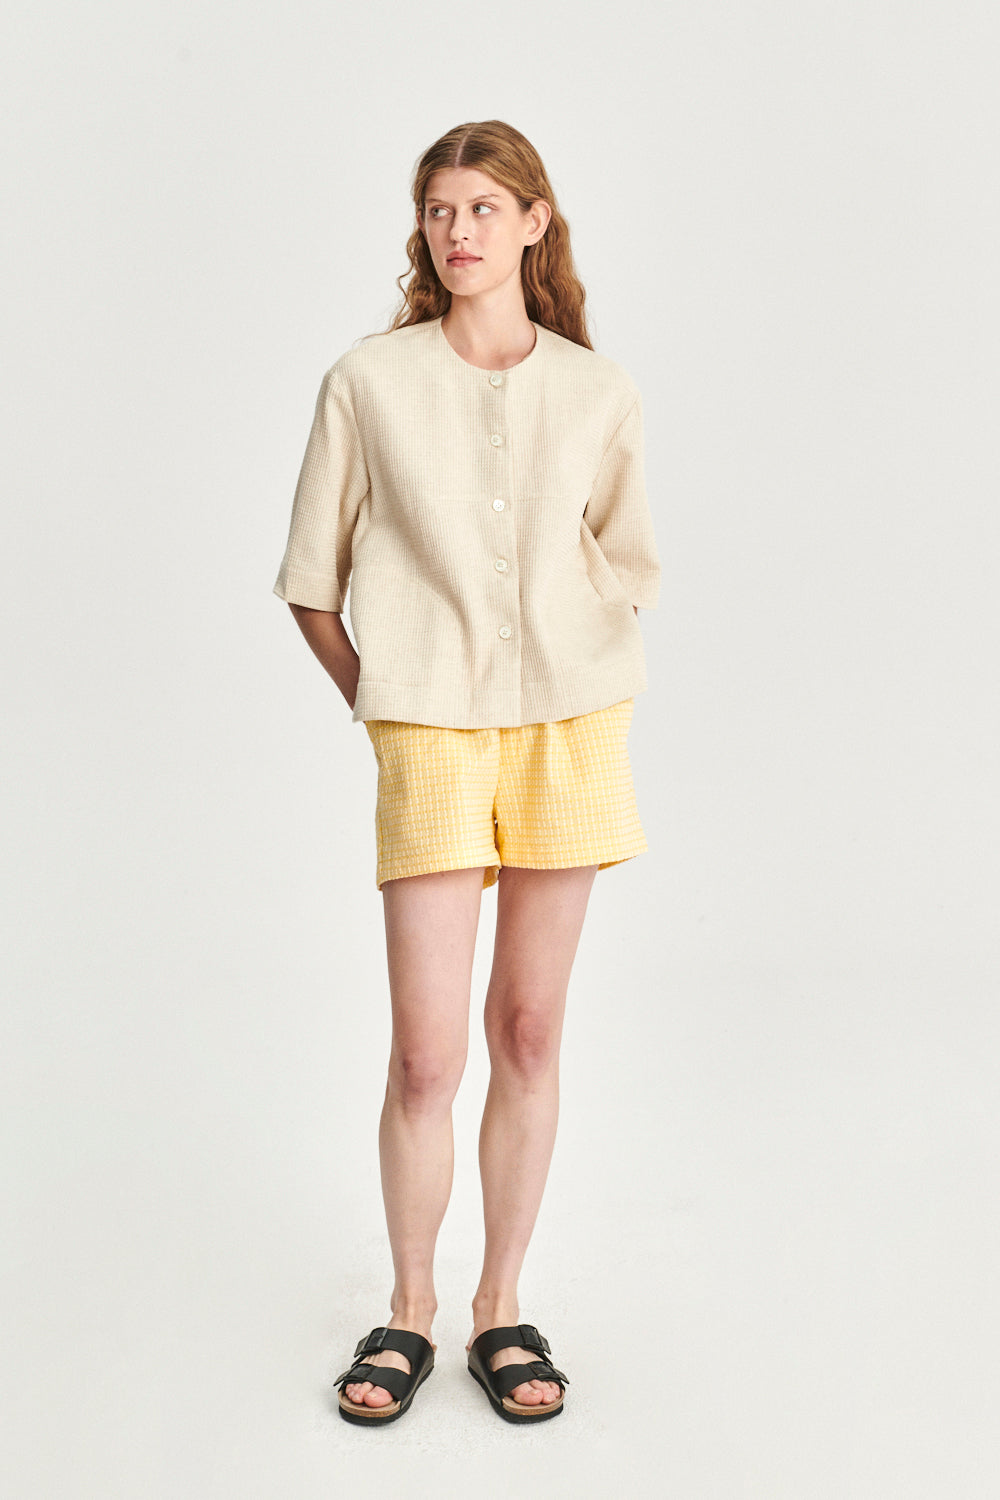 Collarless Relaxed Jacket Shirt in a Light Beige Structural Waffled Japanese Cotton and Linen